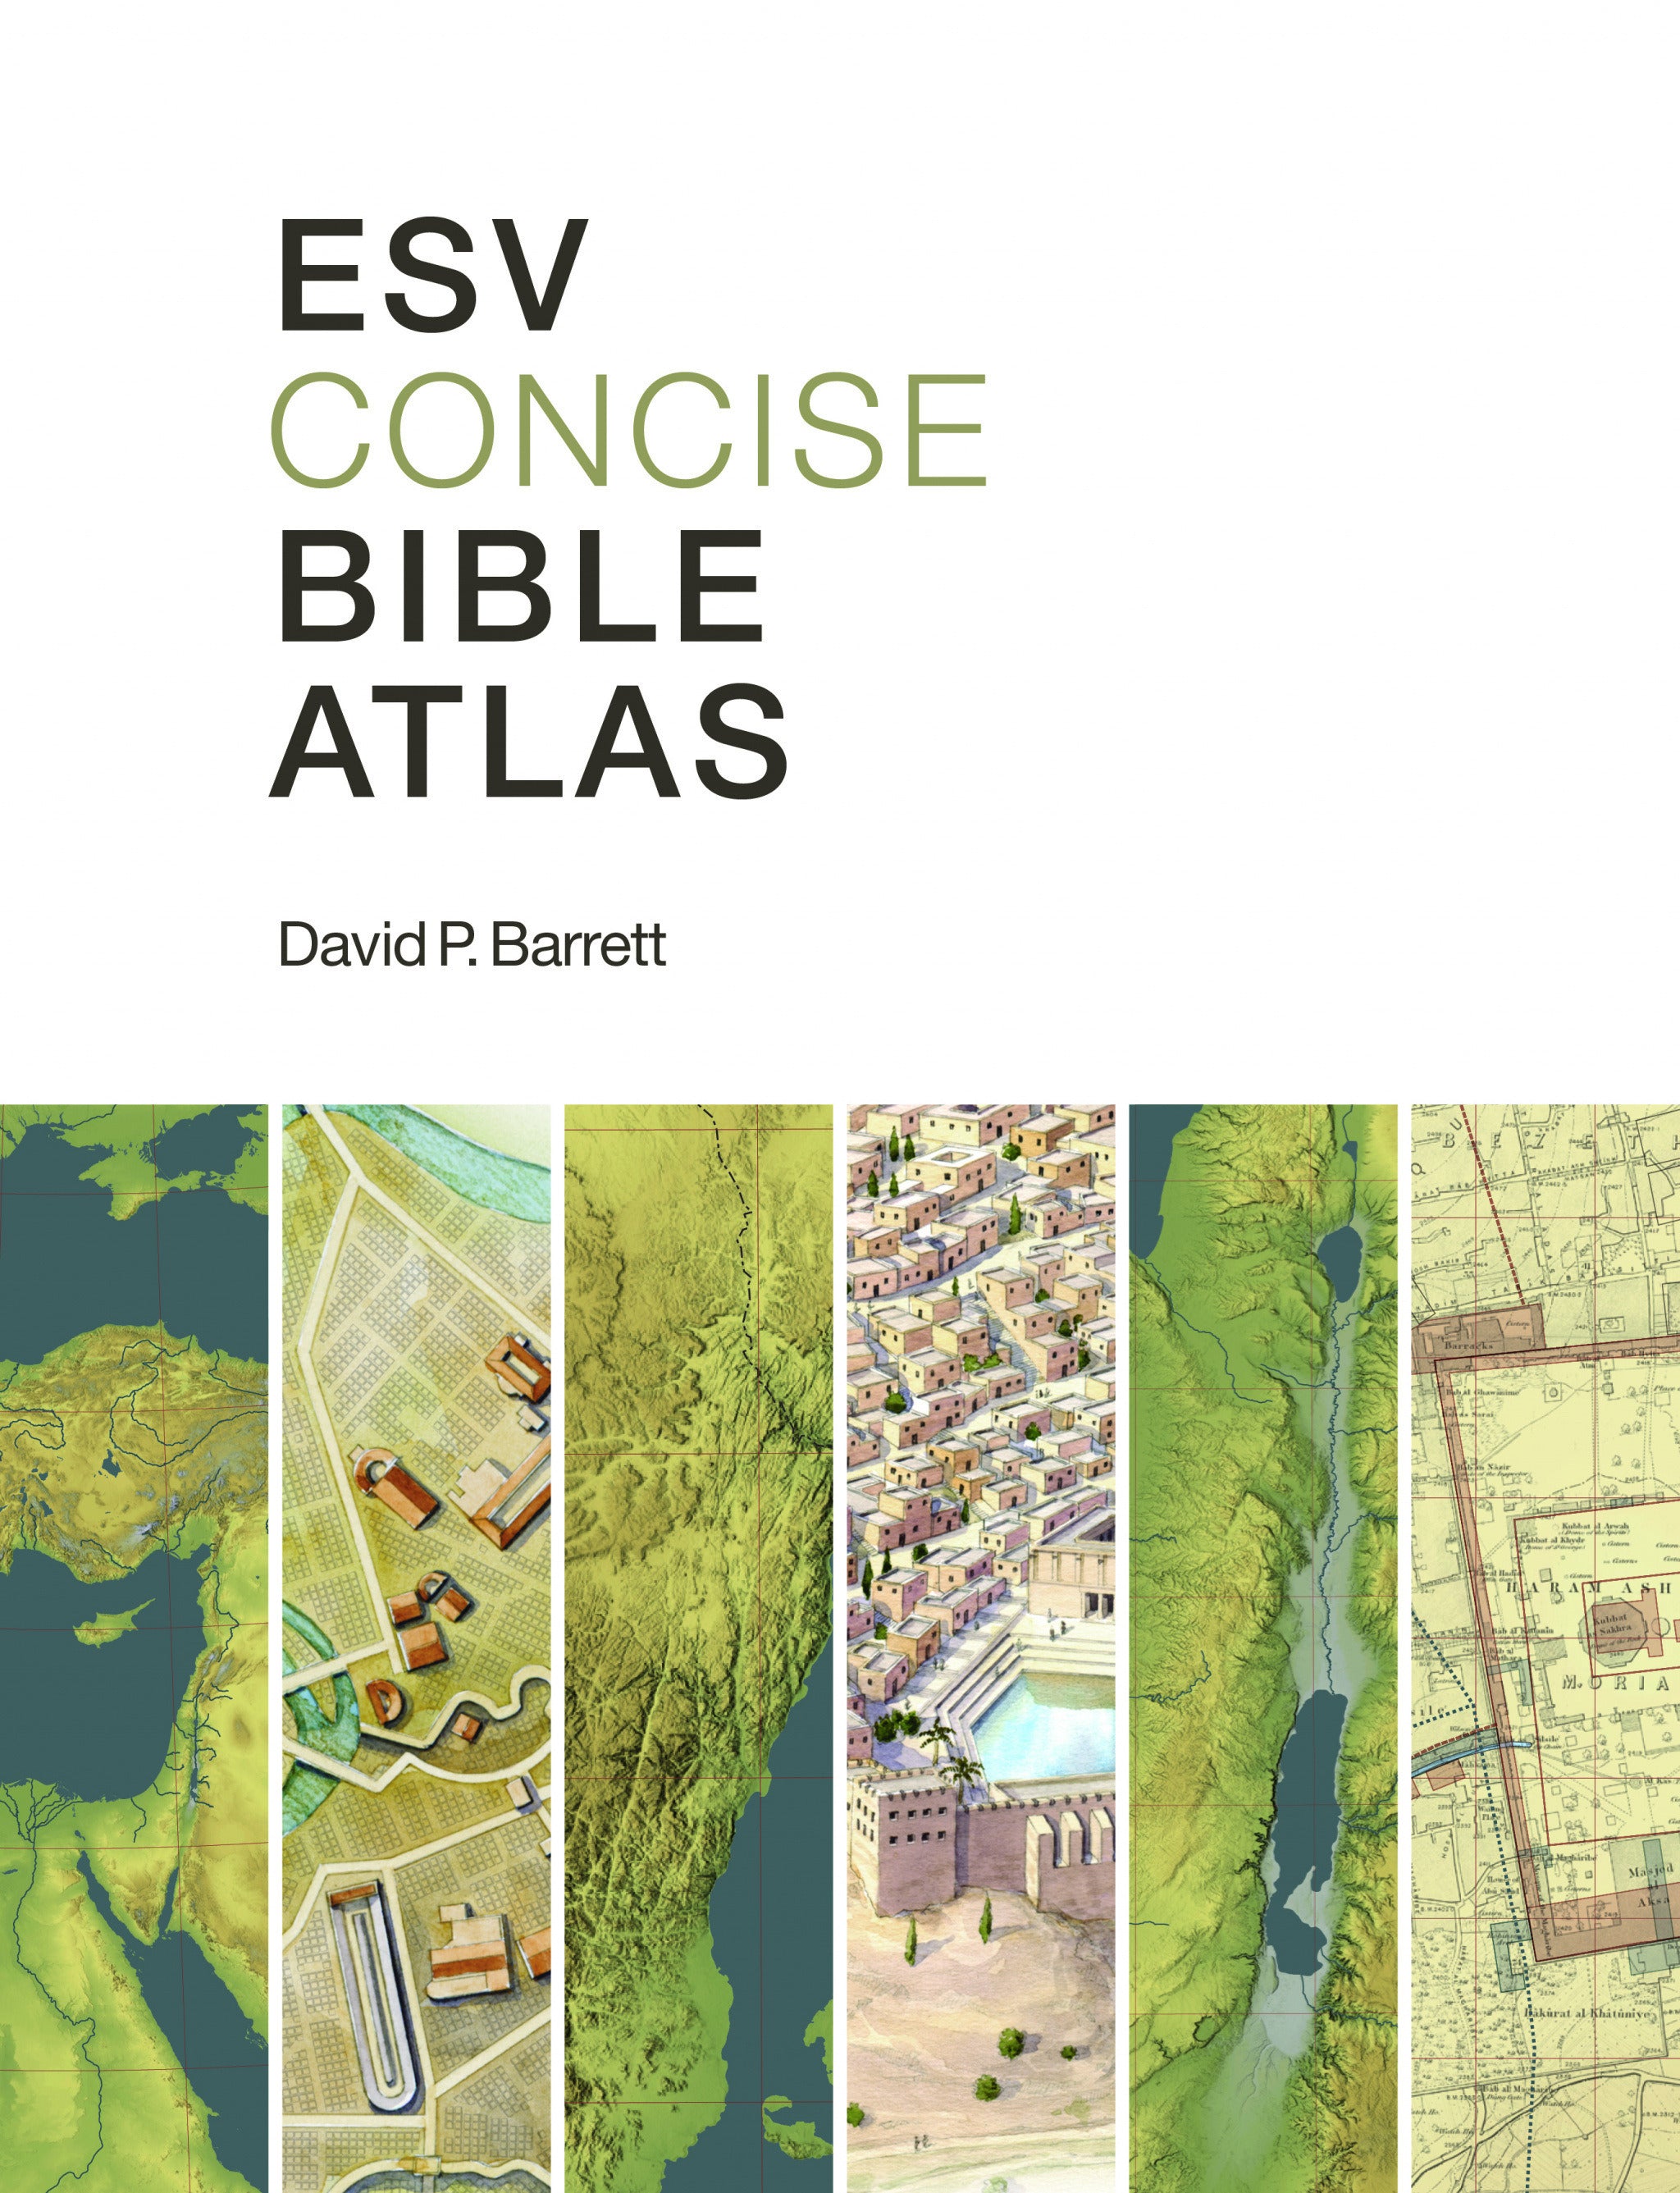 Image of Esv Concise Bible Atlas other